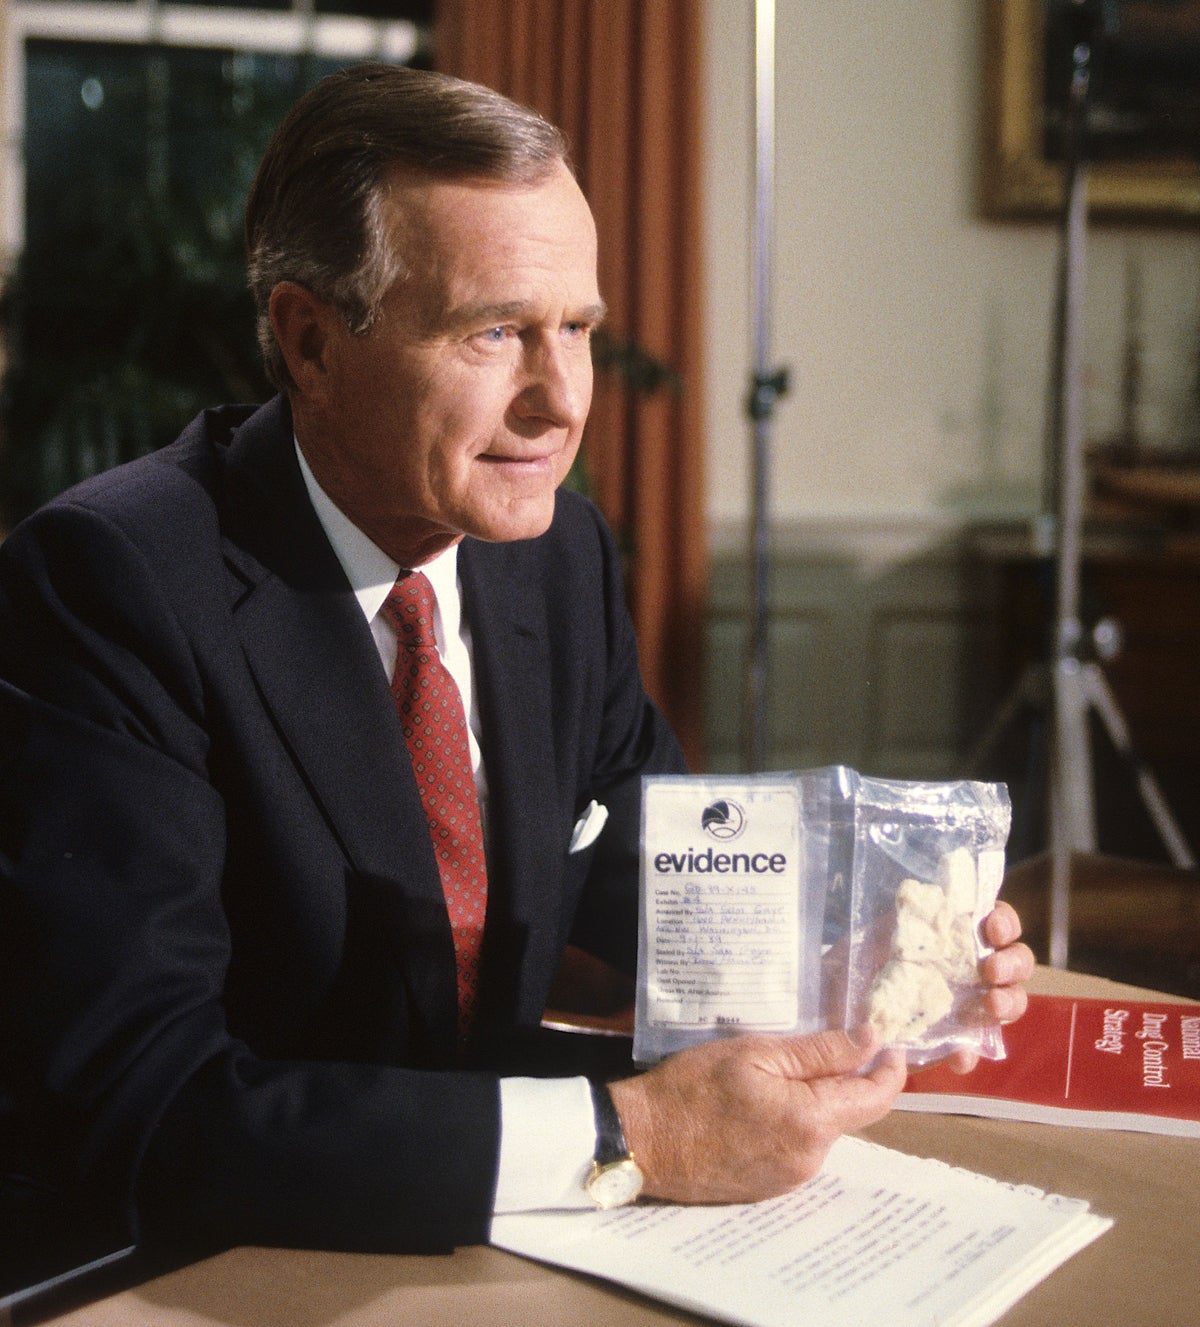 George H W Bush: ‘This is crack cocaine, it was seized a few days ago in a park across the street from the White House’&nbsp;